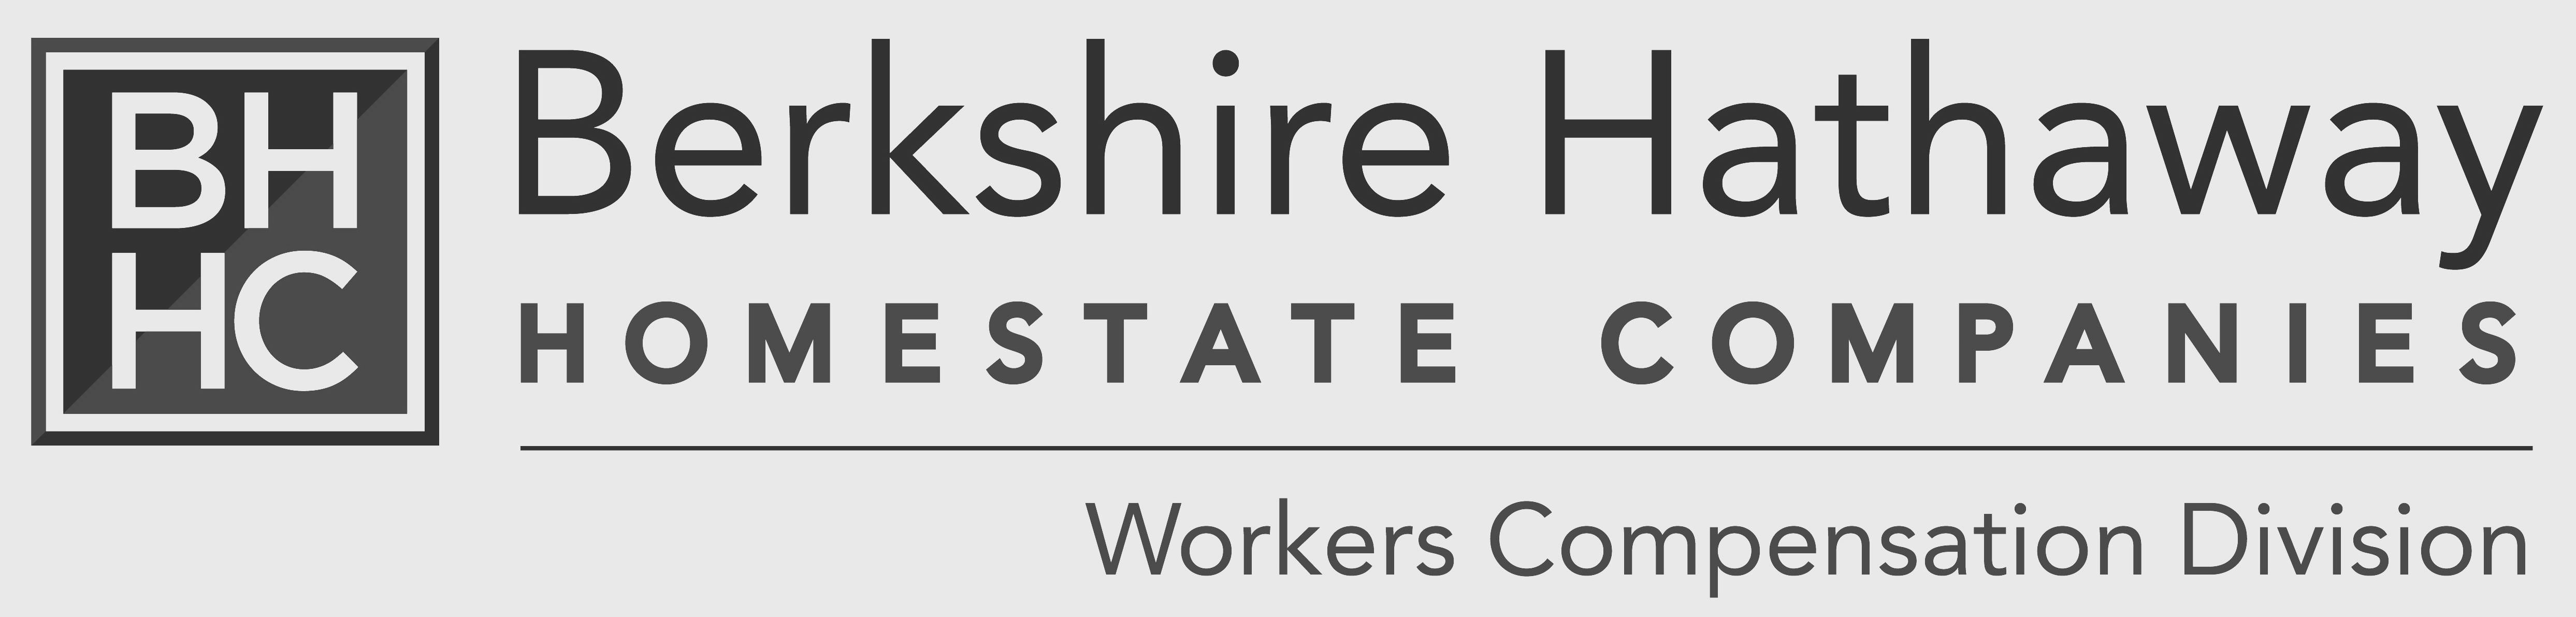  BHHC BERKSHIRE HATHAWAY HOMESTATE COMPANIES WORKERS COMPENSATION DIVISION